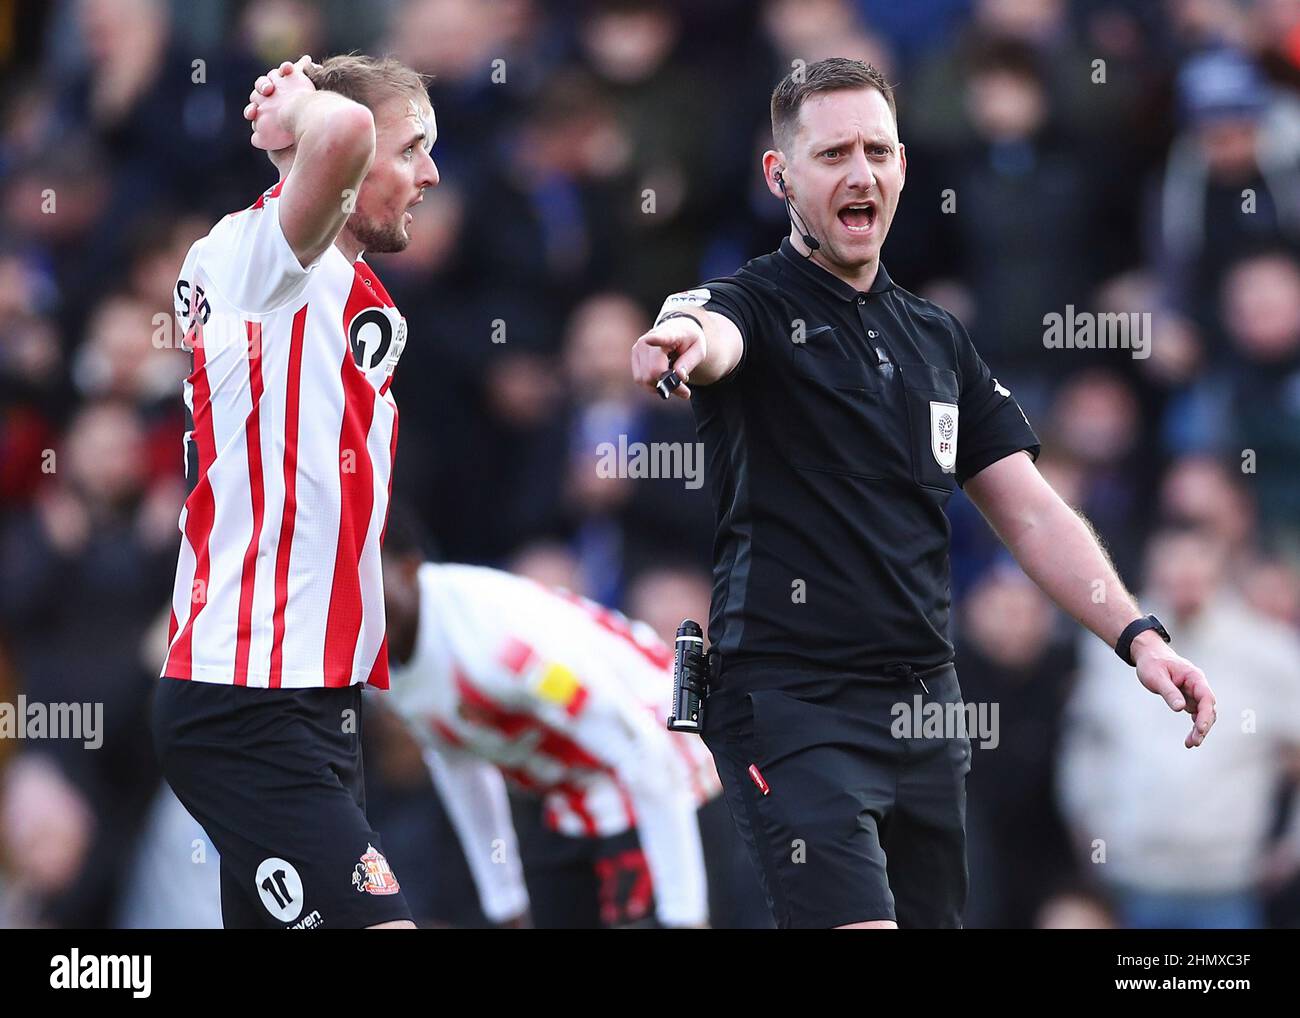 Sunderland's Carl Winchester (left) reacts as referee Simon Mather awards a penalty to AFC Wimbledon during the Sky Bet League One match at The Cherry Red Records Stadium, London. Picture date: Saturday February 12, 2022. Stock Photo